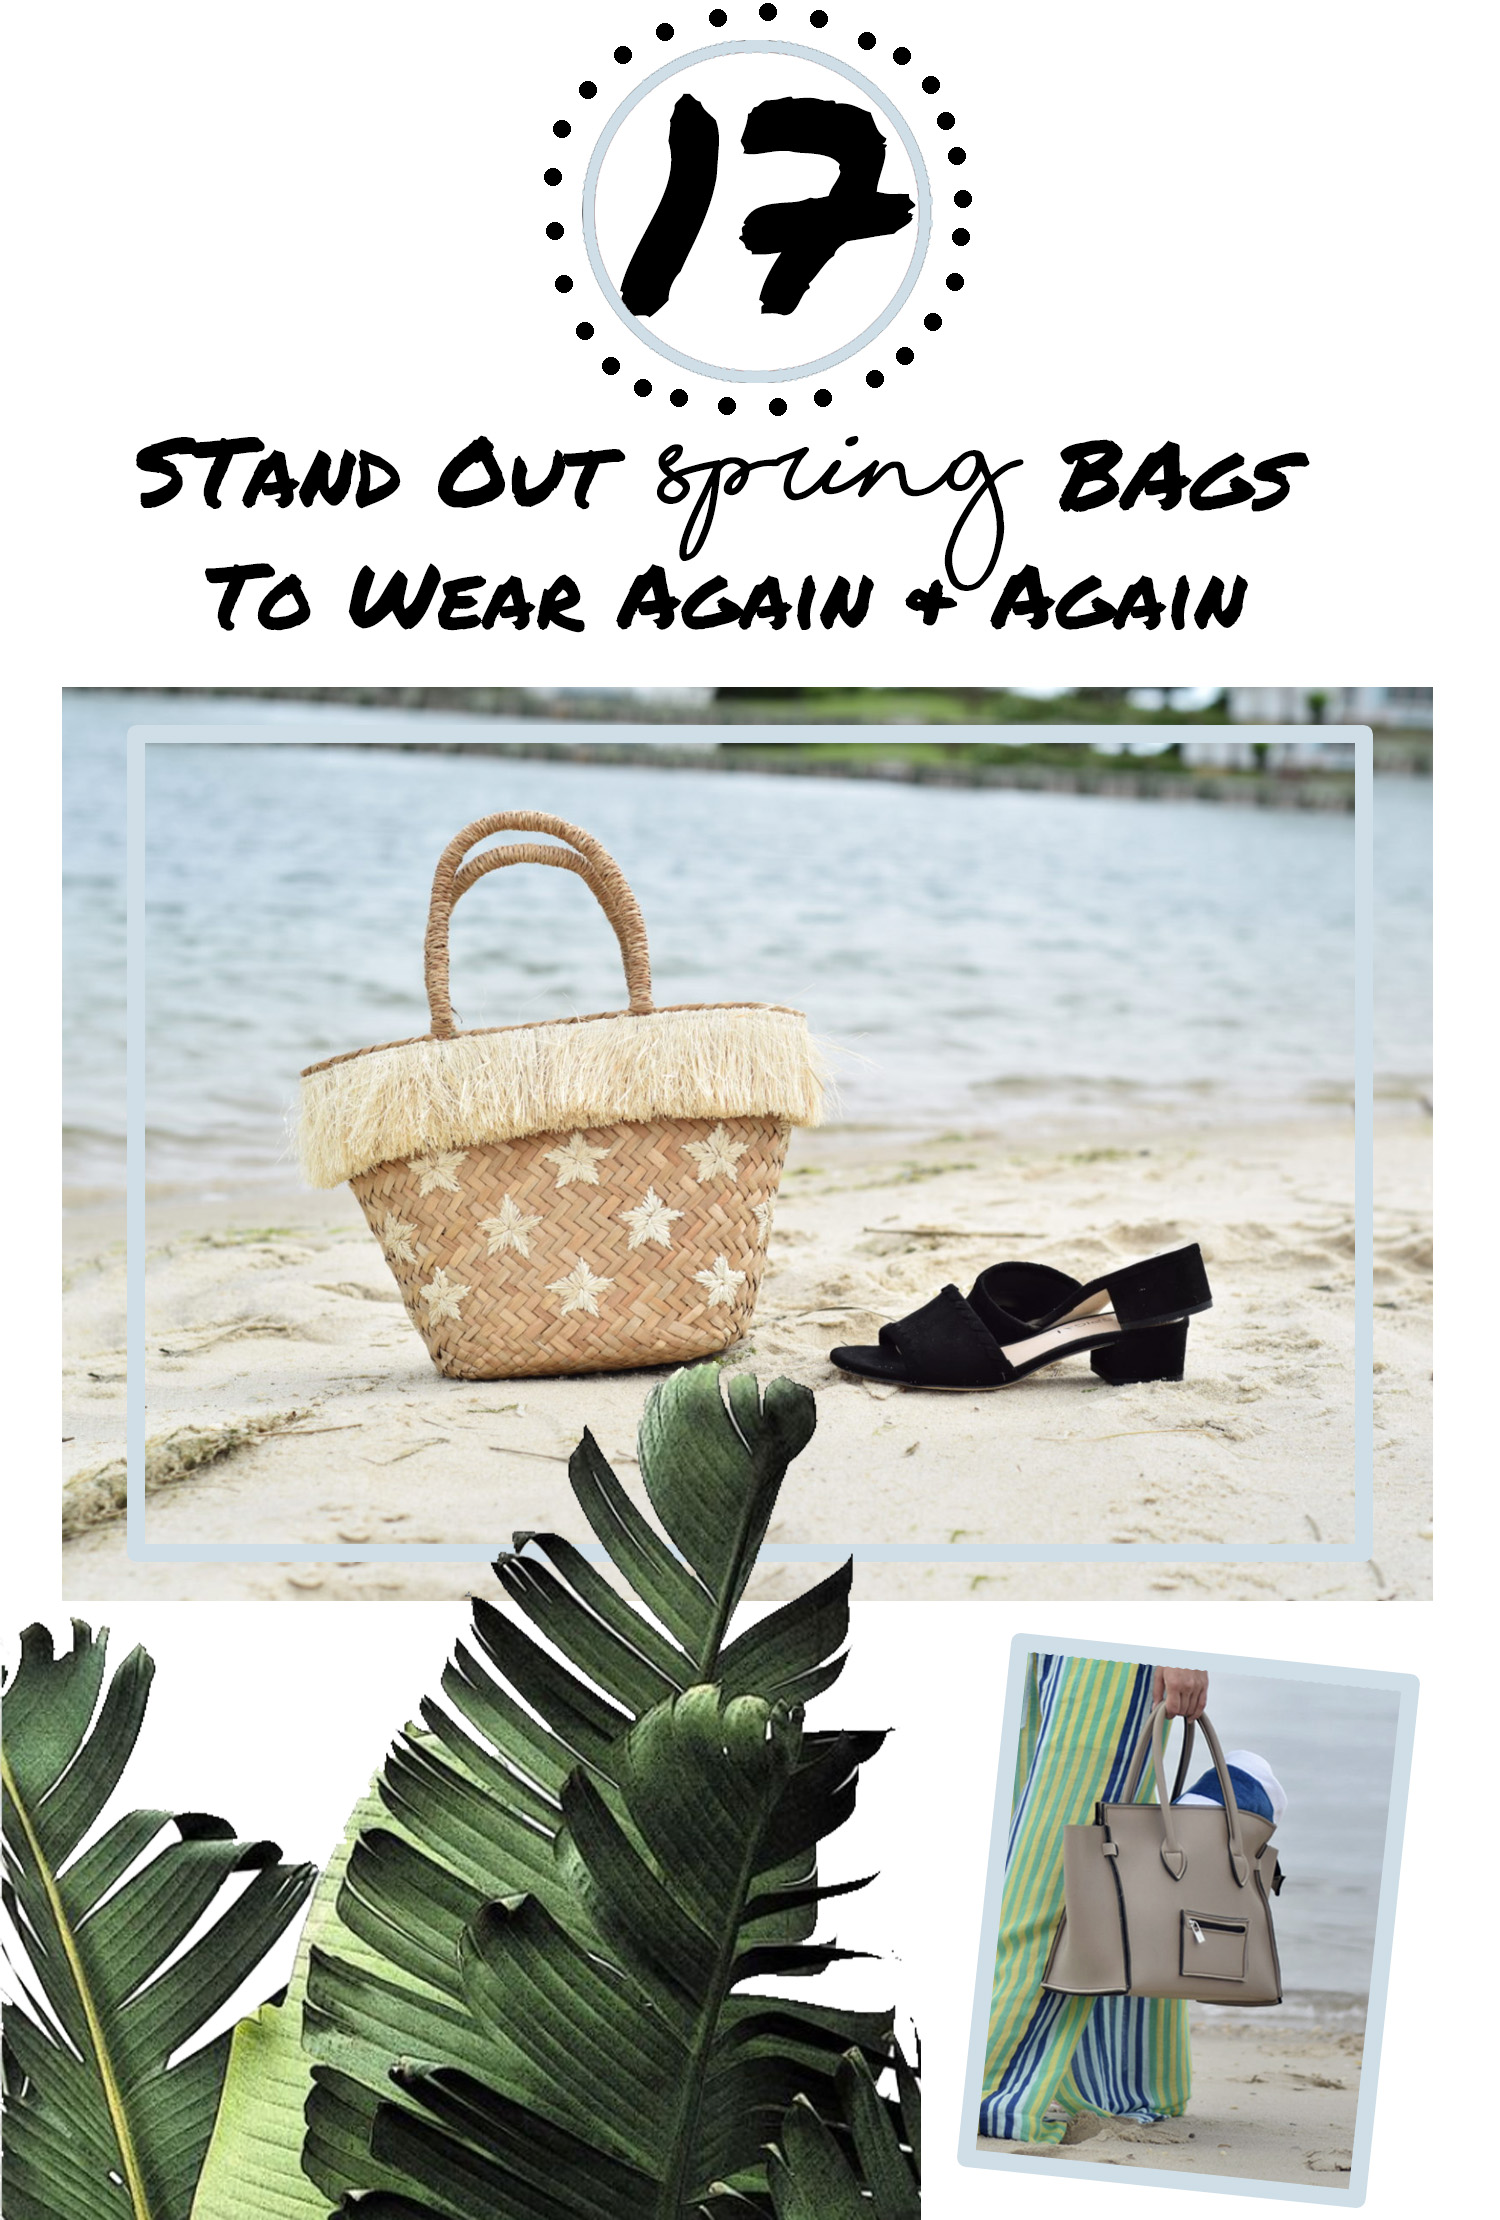 17 Stand Out Spring Bags-Summer Bags-Straw Bags-Handbags-Palm Leaves-Shop the Post-Collage-Beach Bag-new handbag for spring